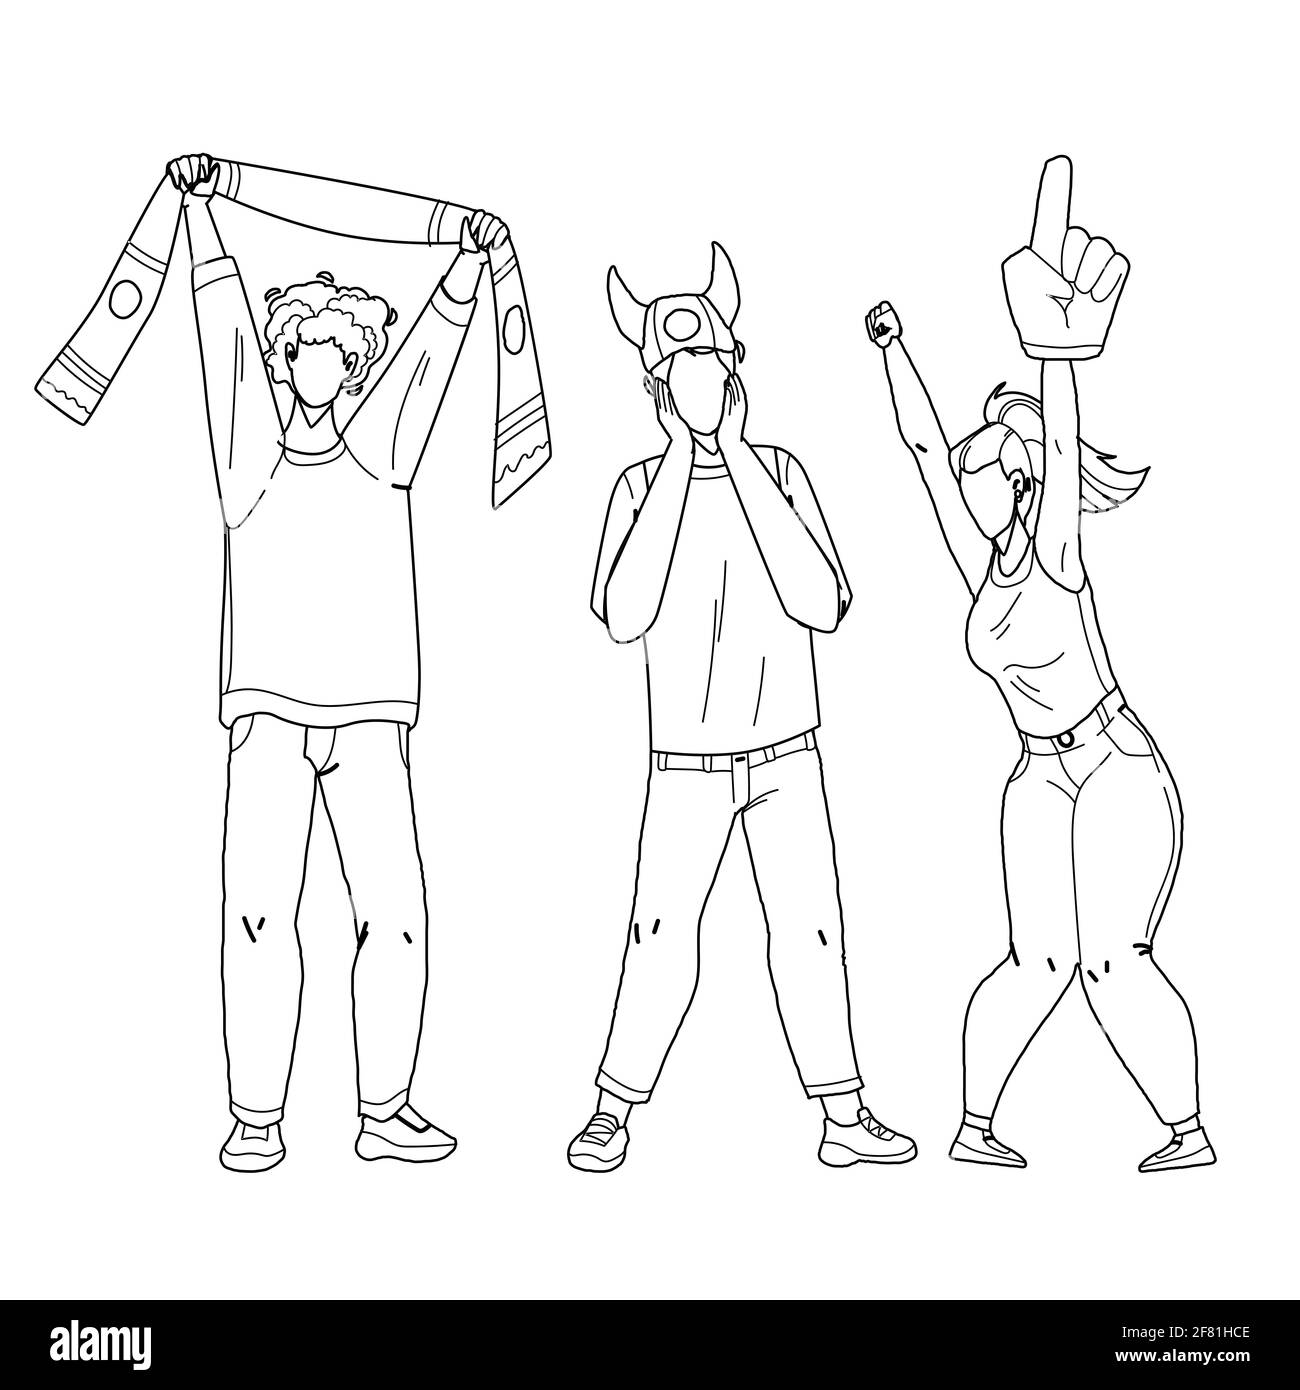 Sports Fans Cheering And Shouting Together Vector Stock Vector